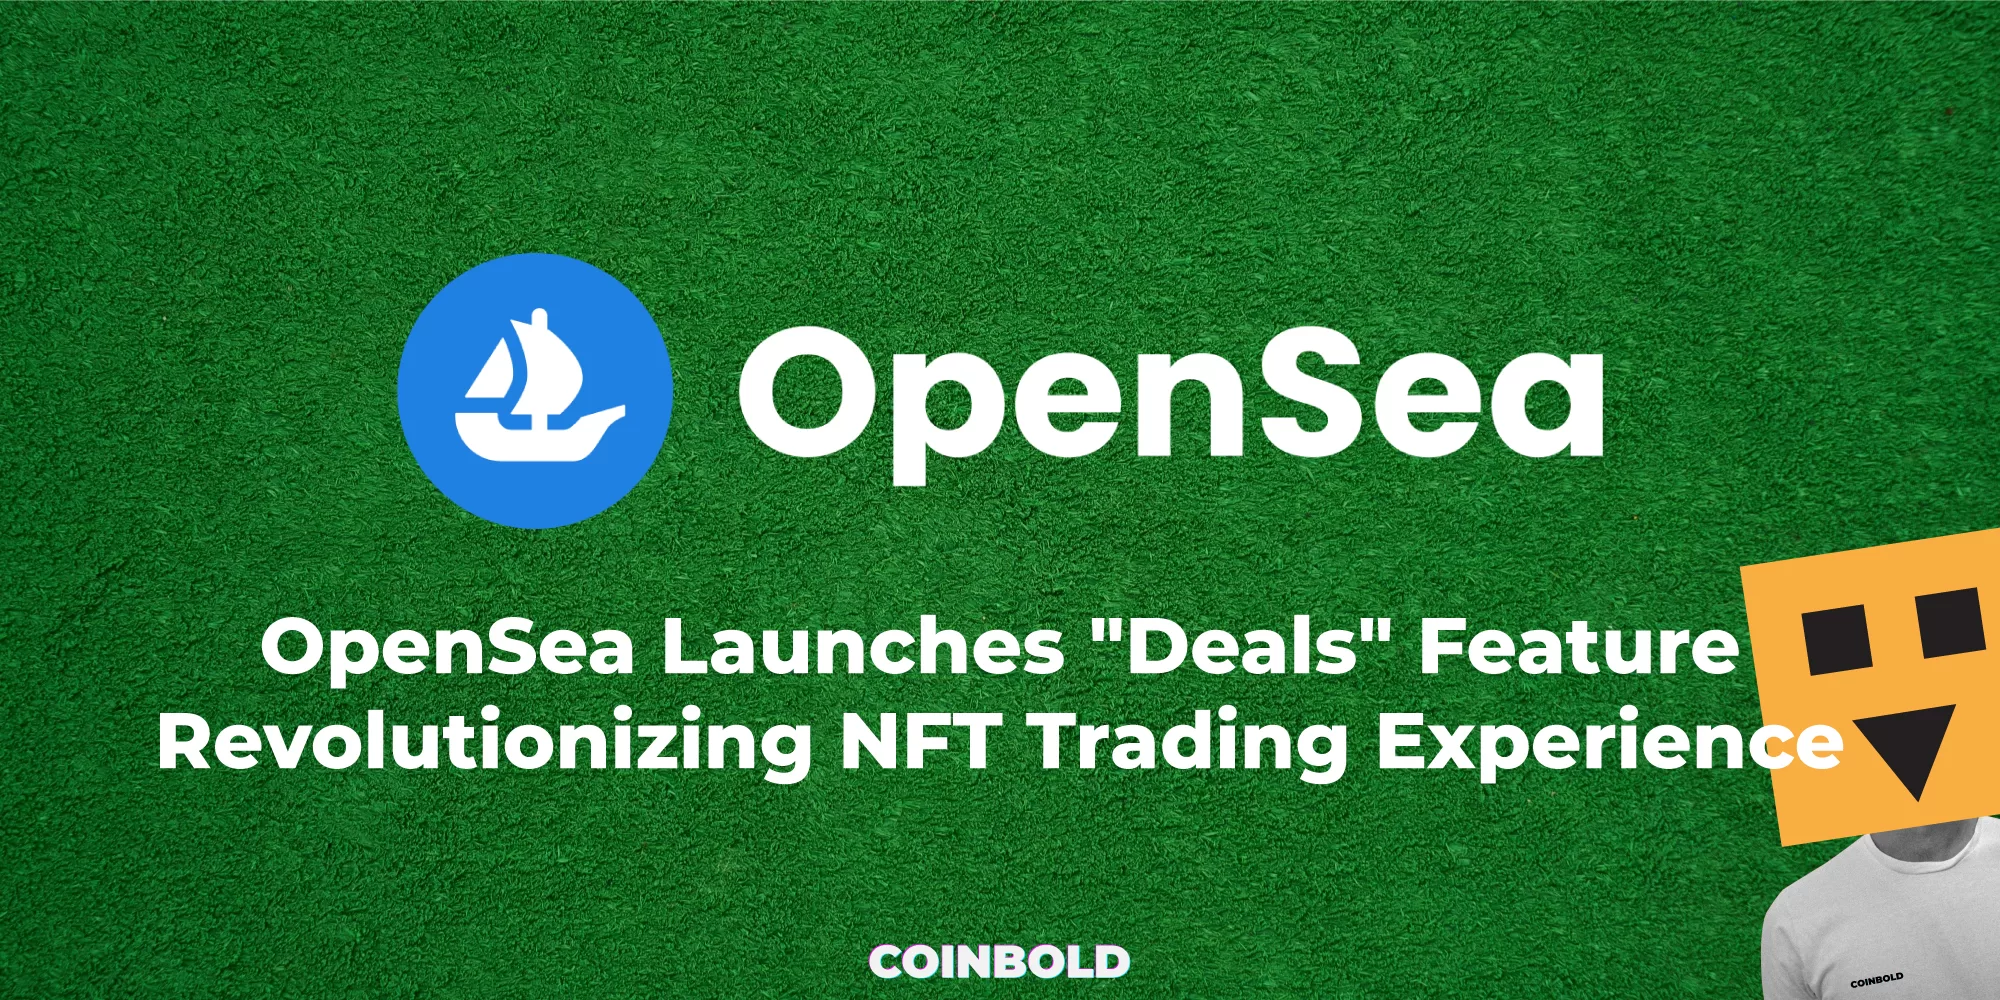 OpenSea Launches "Deals" Feature, Revolutionizing NFT Trading Experience